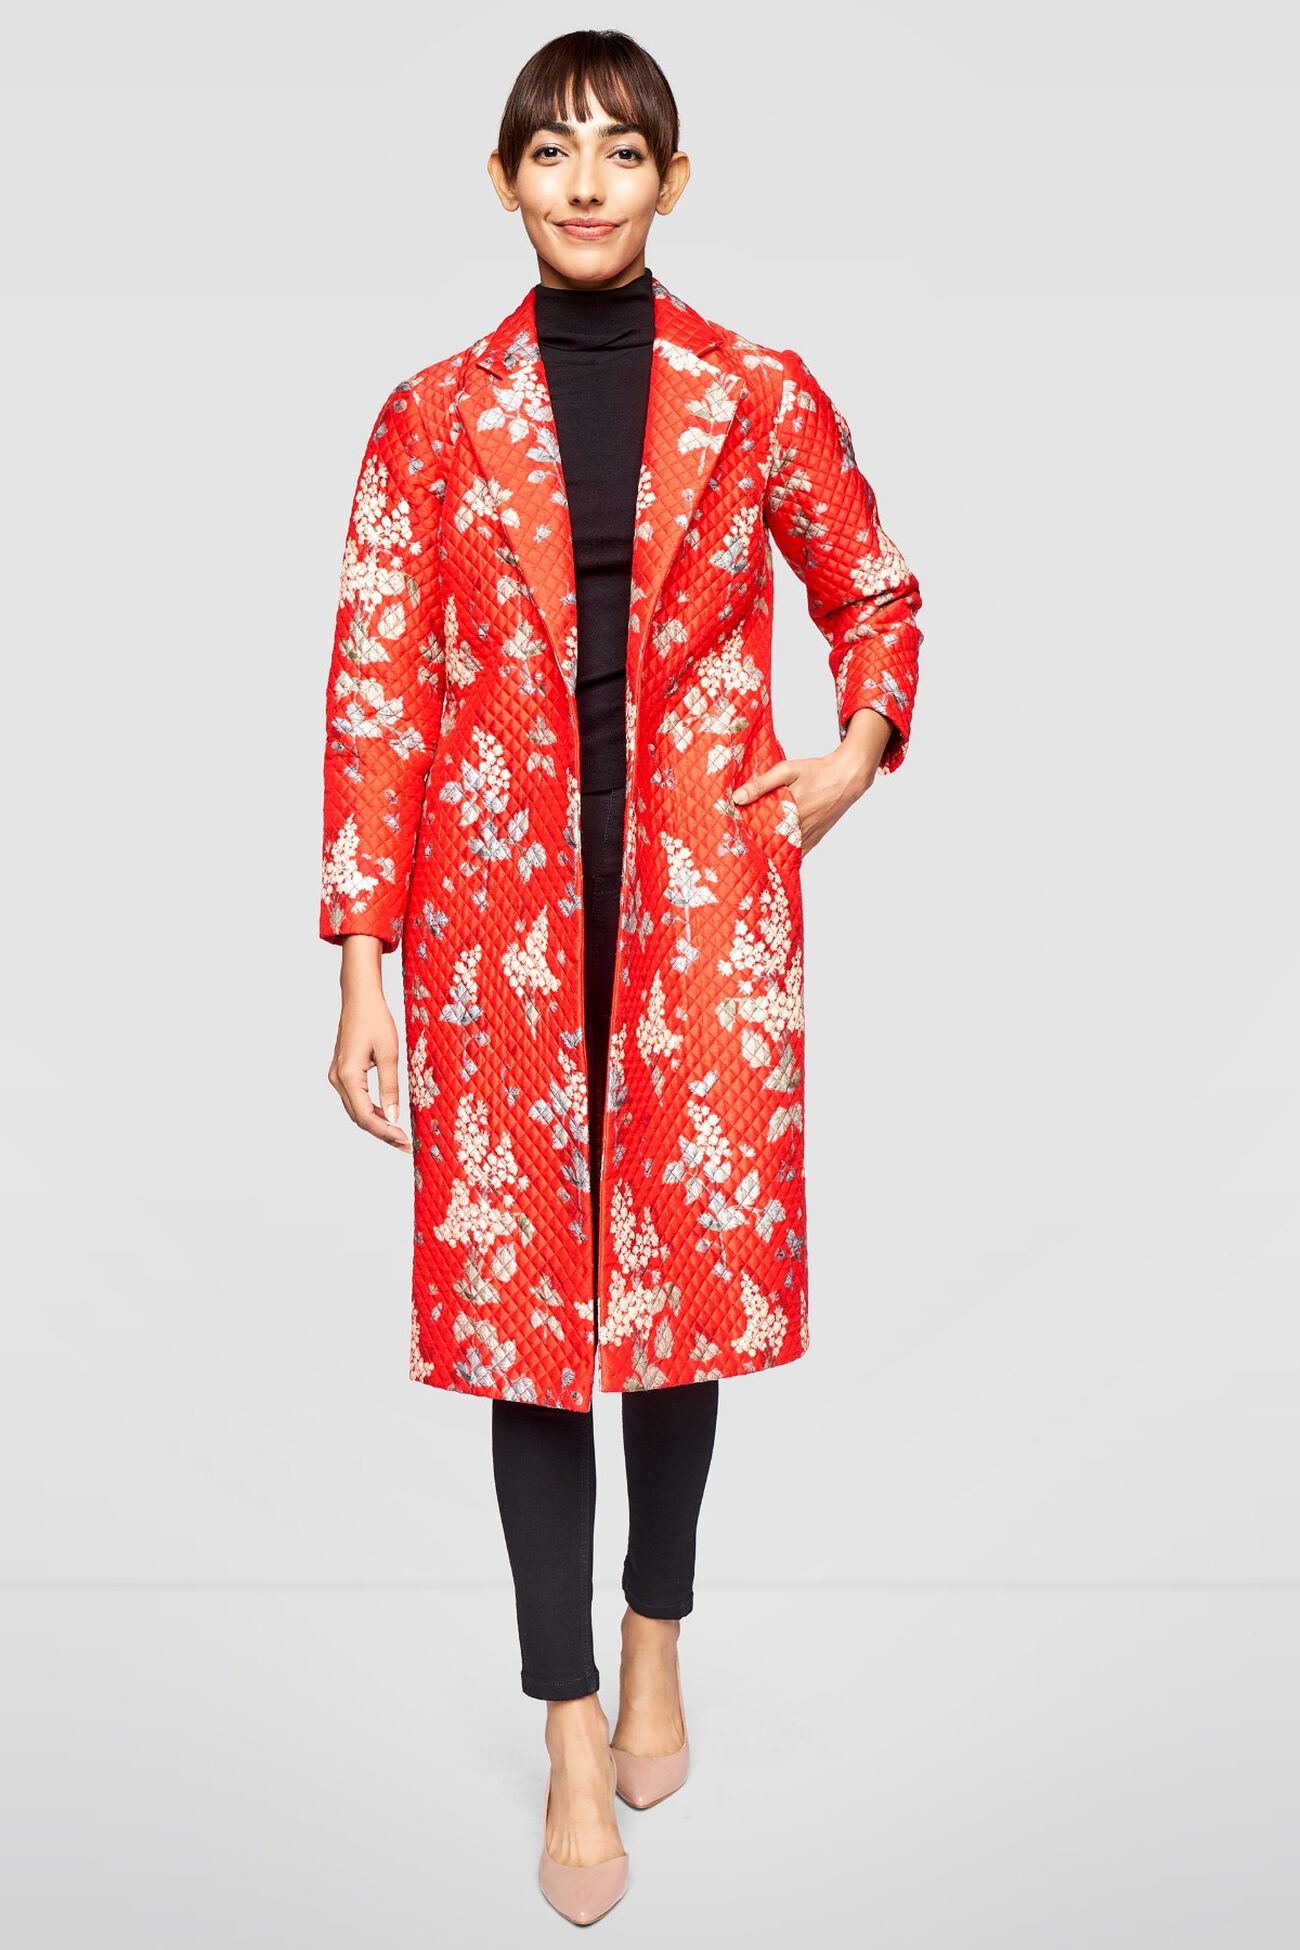 Buy Estelle Jacket – Red for Women from Anita Dongre